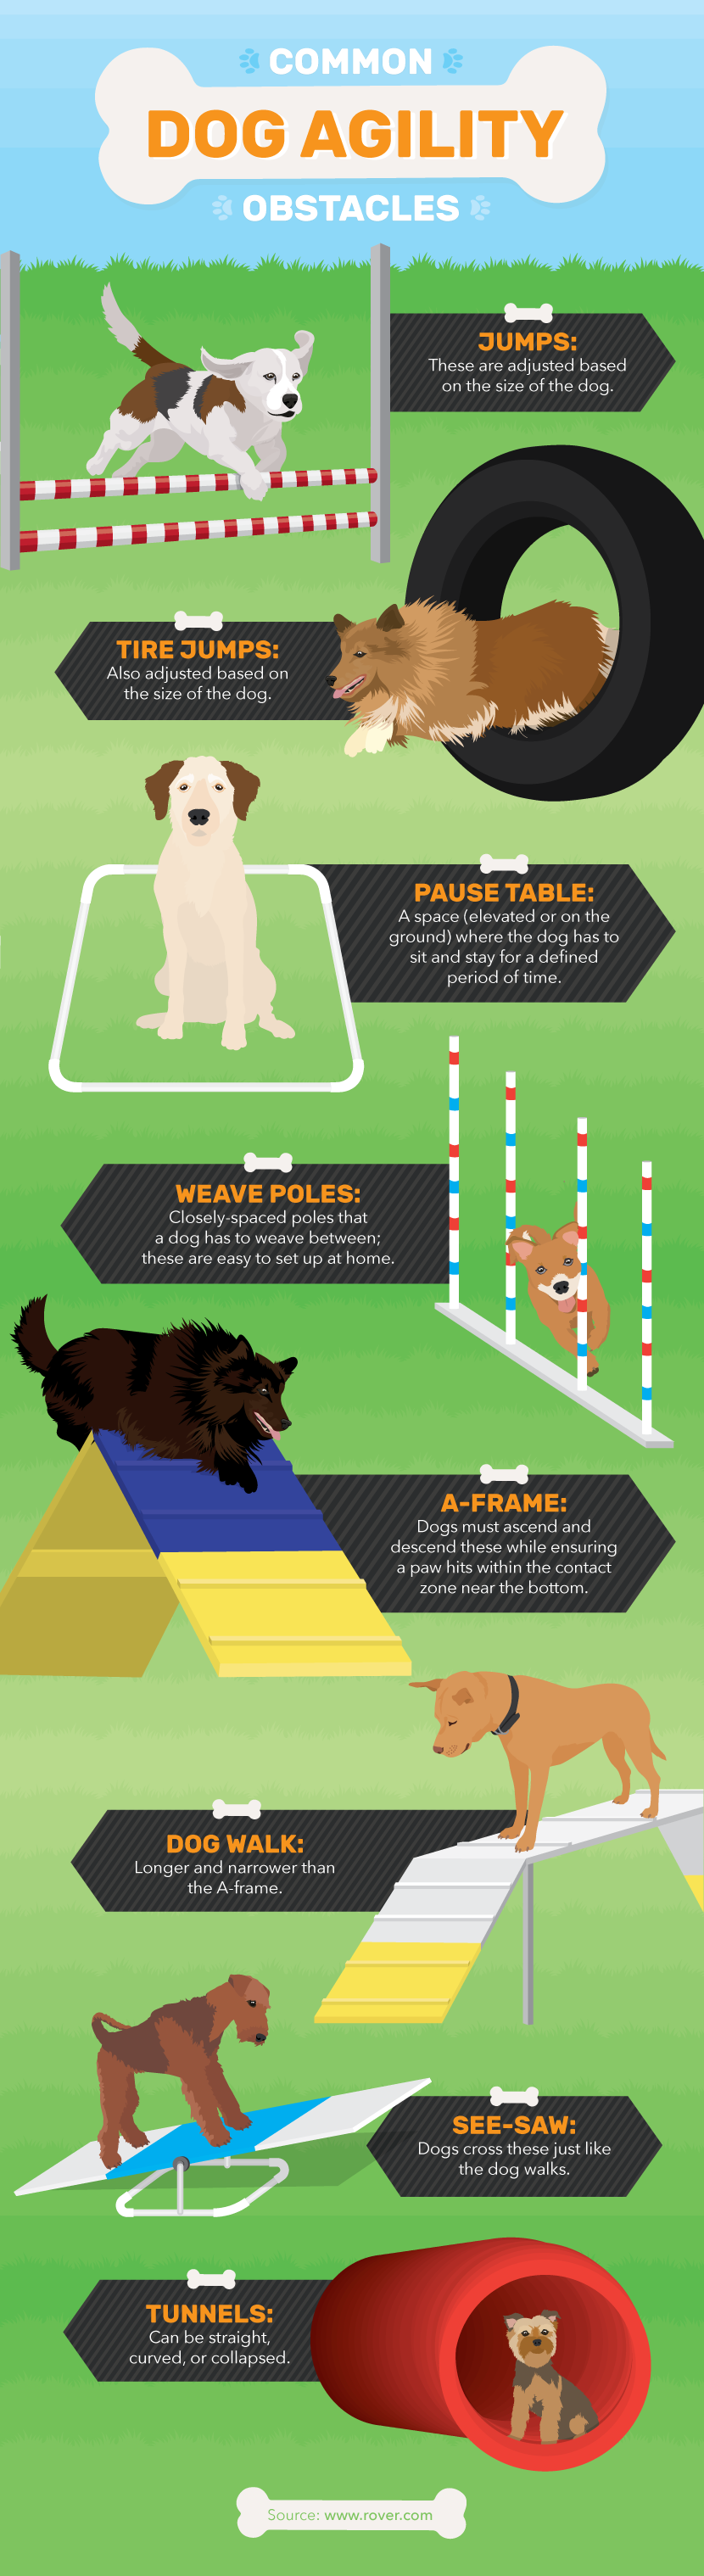 http://www.ereplacementparts.com/blog/wp-content/uploads/2017/06/common-dog-agility-obstacles.png